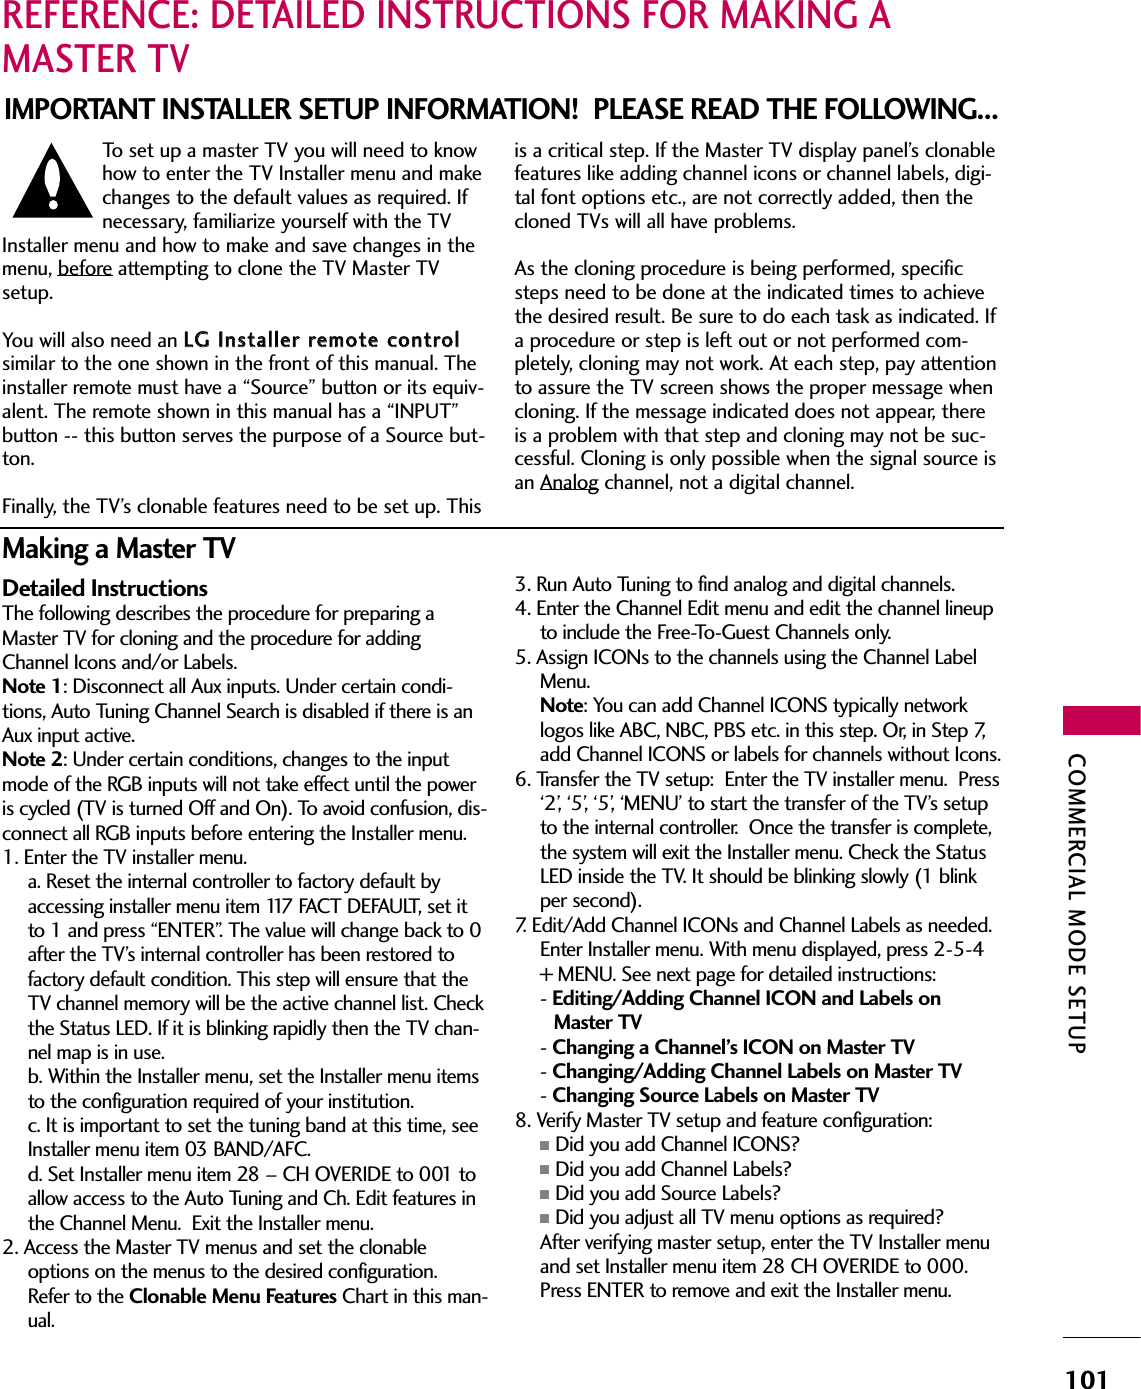 COMMERCIAL MODE SETUP101REFERENCE: DETAILED INSTRUCTIONS FOR MAKING AMASTER TVIMPORTANT INSTALLER SETUP INFORMATION!  PLEASE READ THE FOLLOWING...To  set  up  a  master  TV  you  will  need  to  knowhow to enter the TV Installer menu and makechanges to the default values as required. Ifnecessary, familiarize yourself with the TVInstaller menu and how to make and save changes in themenu, beforeattempting to clone the TV Master TVsetup. You will also need an LLGG  IInnssttaalllleerr  rreemmoottee  ccoonnttrroollsimilar to the one shown in the front of this manual. Theinstaller remote must have a “Source” button or its equiv-alent. The remote shown in this manual has a “INPUT”button -- this button serves the purpose of a Source but-ton. Finally, the TV’s clonable features need to be set up. Thisis a critical step. If the Master TV display panel’s clonablefeatures like adding channel icons or channel labels, digi-tal font options etc., are not correctly added, then thecloned TVs will all have problems. As the cloning procedure is being performed, specificsteps need to be done at the indicated times to achievethe desired result. Be sure to do each task as indicated. Ifa procedure or step is left out or not performed com-pletely, cloning may not work. At each step, pay attentionto assure the TV screen shows the proper message whencloning. If the message indicated does not appear, thereis a problem with that step and cloning may not be suc-cessful. Cloning is only possible when the signal source isan Analog channel, not a digital channel.Detailed InstructionsThe following describes the procedure for preparing aMaster TV for cloning and the procedure for addingChannel Icons and/or Labels.Note 1: Disconnect all Aux inputs. Under certain condi-tions,  Auto  Tuning  Channel  Search  is  disabled  if  there  is  anAux input active.Note 2: Under certain conditions, changes to the inputmode of the RGB inputs will not take effect until the poweris cycled (TV is turned Off and On). To avoid confusion, dis-connect all RGB inputs before entering the Installer menu.1. Enter the TV installer menu.  a. Reset the internal controller to factory default byaccessing installer menu item 117 FACT DEFAULT, set itto 1 and press “ENTER”. The value will change back to 0after the TV’s internal controller has been restored tofactory default condition. This step will ensure that theTV channel memory will be the active channel list. Checkthe Status LED. If it is blinking rapidly then the TV chan-nel map is in use. b. Within the Installer menu, set the Installer menu itemsto the configuration required of your institution.  c. It is important to set the tuning band at this time, seeInstaller menu item 03 BAND/AFC.  d. Set Installer menu item 28 – CH OVERIDE to 001 toallow  access  to  the  Auto  Tuning  and  Ch.  Edit  features  inthe Channel Menu.  Exit the Installer menu.2. Access the Master TV menus and set the clonableoptions on the menus to the desired configuration.Refer to the Clonable Menu Features Chart in this man-ual.3.  Run  Auto  Tuning  to  find  analog  and  digital  channels.4. Enter the Channel Edit menu and edit the channel lineupto  include  the  Free-To-Guest  Channels  only.  5. Assign ICONs to the channels using the Channel LabelMenu.  Note: You can add Channel ICONS typically networklogos like ABC, NBC, PBS etc. in this step. Or, in Step 7,add Channel ICONS or labels for channels without Icons.6.  Transfer  the  TV  setup:    Enter  the  TV  installer  menu.    Press‘2’, ‘5’, ‘5’, ‘MENU’ to start the transfer of the TV’s setupto the internal controller.  Once the transfer is complete,the system will exit the Installer menu. Check the StatusLED inside the TV. It should be blinking slowly (1 blinkper second).7. Edit/Add Channel ICONs and Channel Labels as needed.  Enter Installer menu. With menu displayed, press 2-5-4+ MENU. See next page for detailed instructions:- Editing/Adding Channel ICON and Labels on Master TV- Changing a Channel’s ICON on Master TV- Changing/Adding Channel Labels on Master TV- Changing Source Labels on Master TV8. Verify Master TV setup and feature configuration:■Did you add Channel ICONS?■Did you add Channel Labels?■Did you add Source Labels?■Did you adjust all TV menu options as required? After verifying master setup, enter the TV Installer menuand set Installer menu item 28 CH OVERIDE to 000.Press ENTER to remove and exit the Installer menu.Making a Master TV